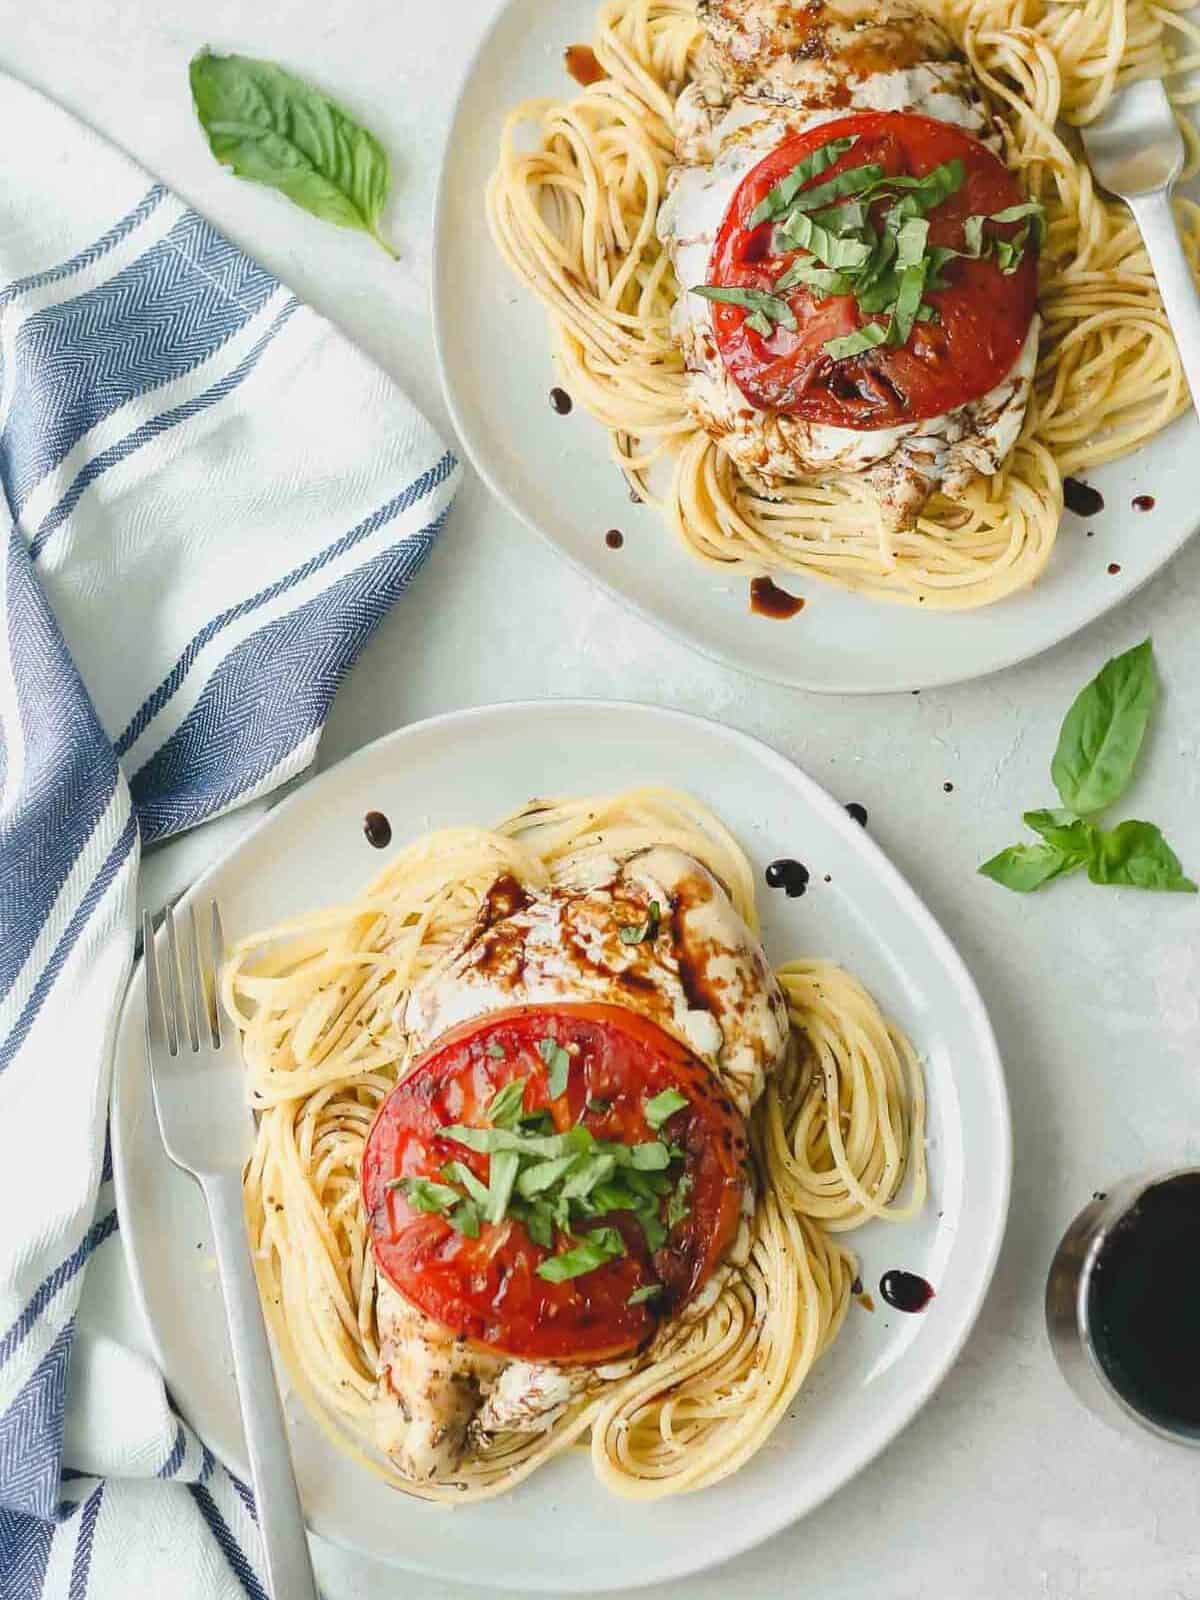 caprese chicken breasts on beds of spaghetti, plated on white dinner plates with forks